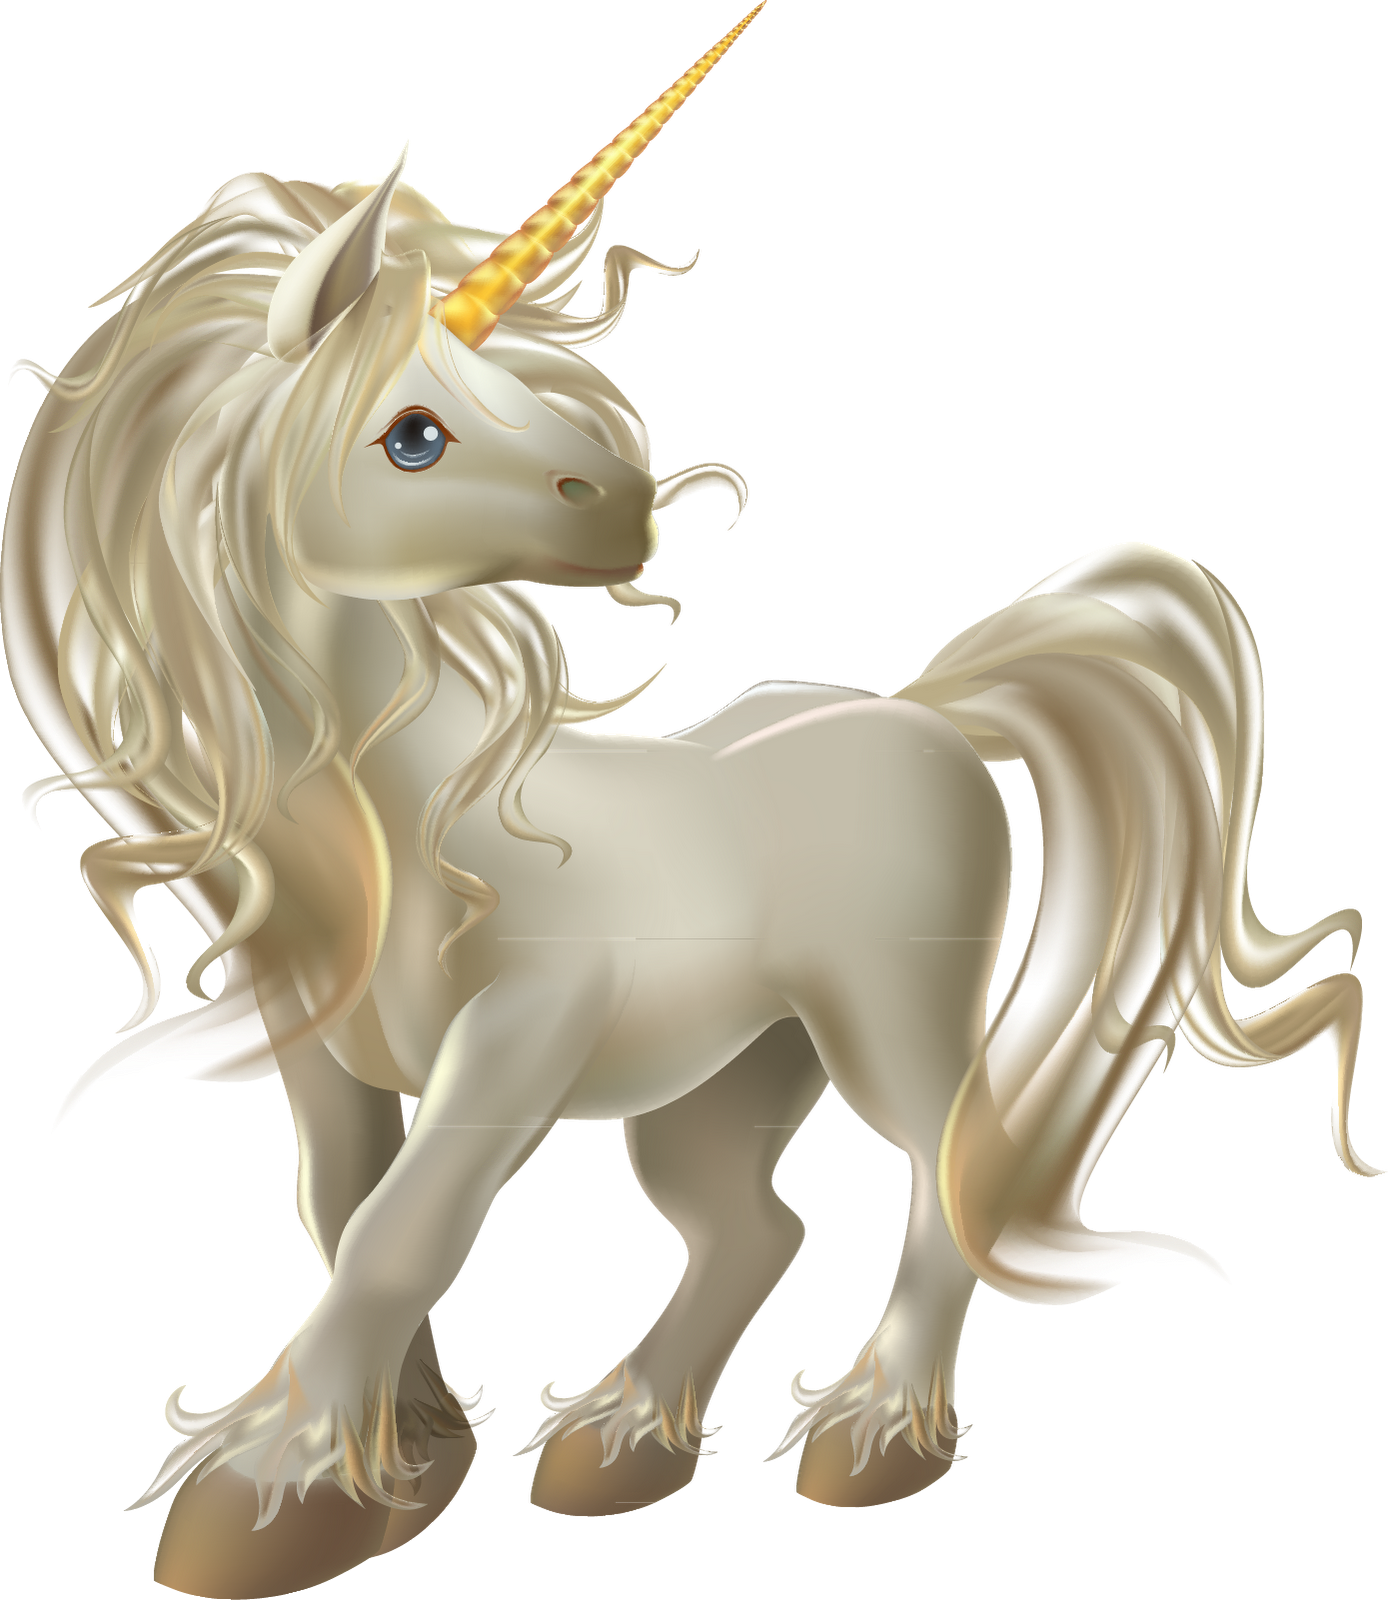 Cute Baby Unicorn Png Transparent Background Free Download 44487 Freeiconspng